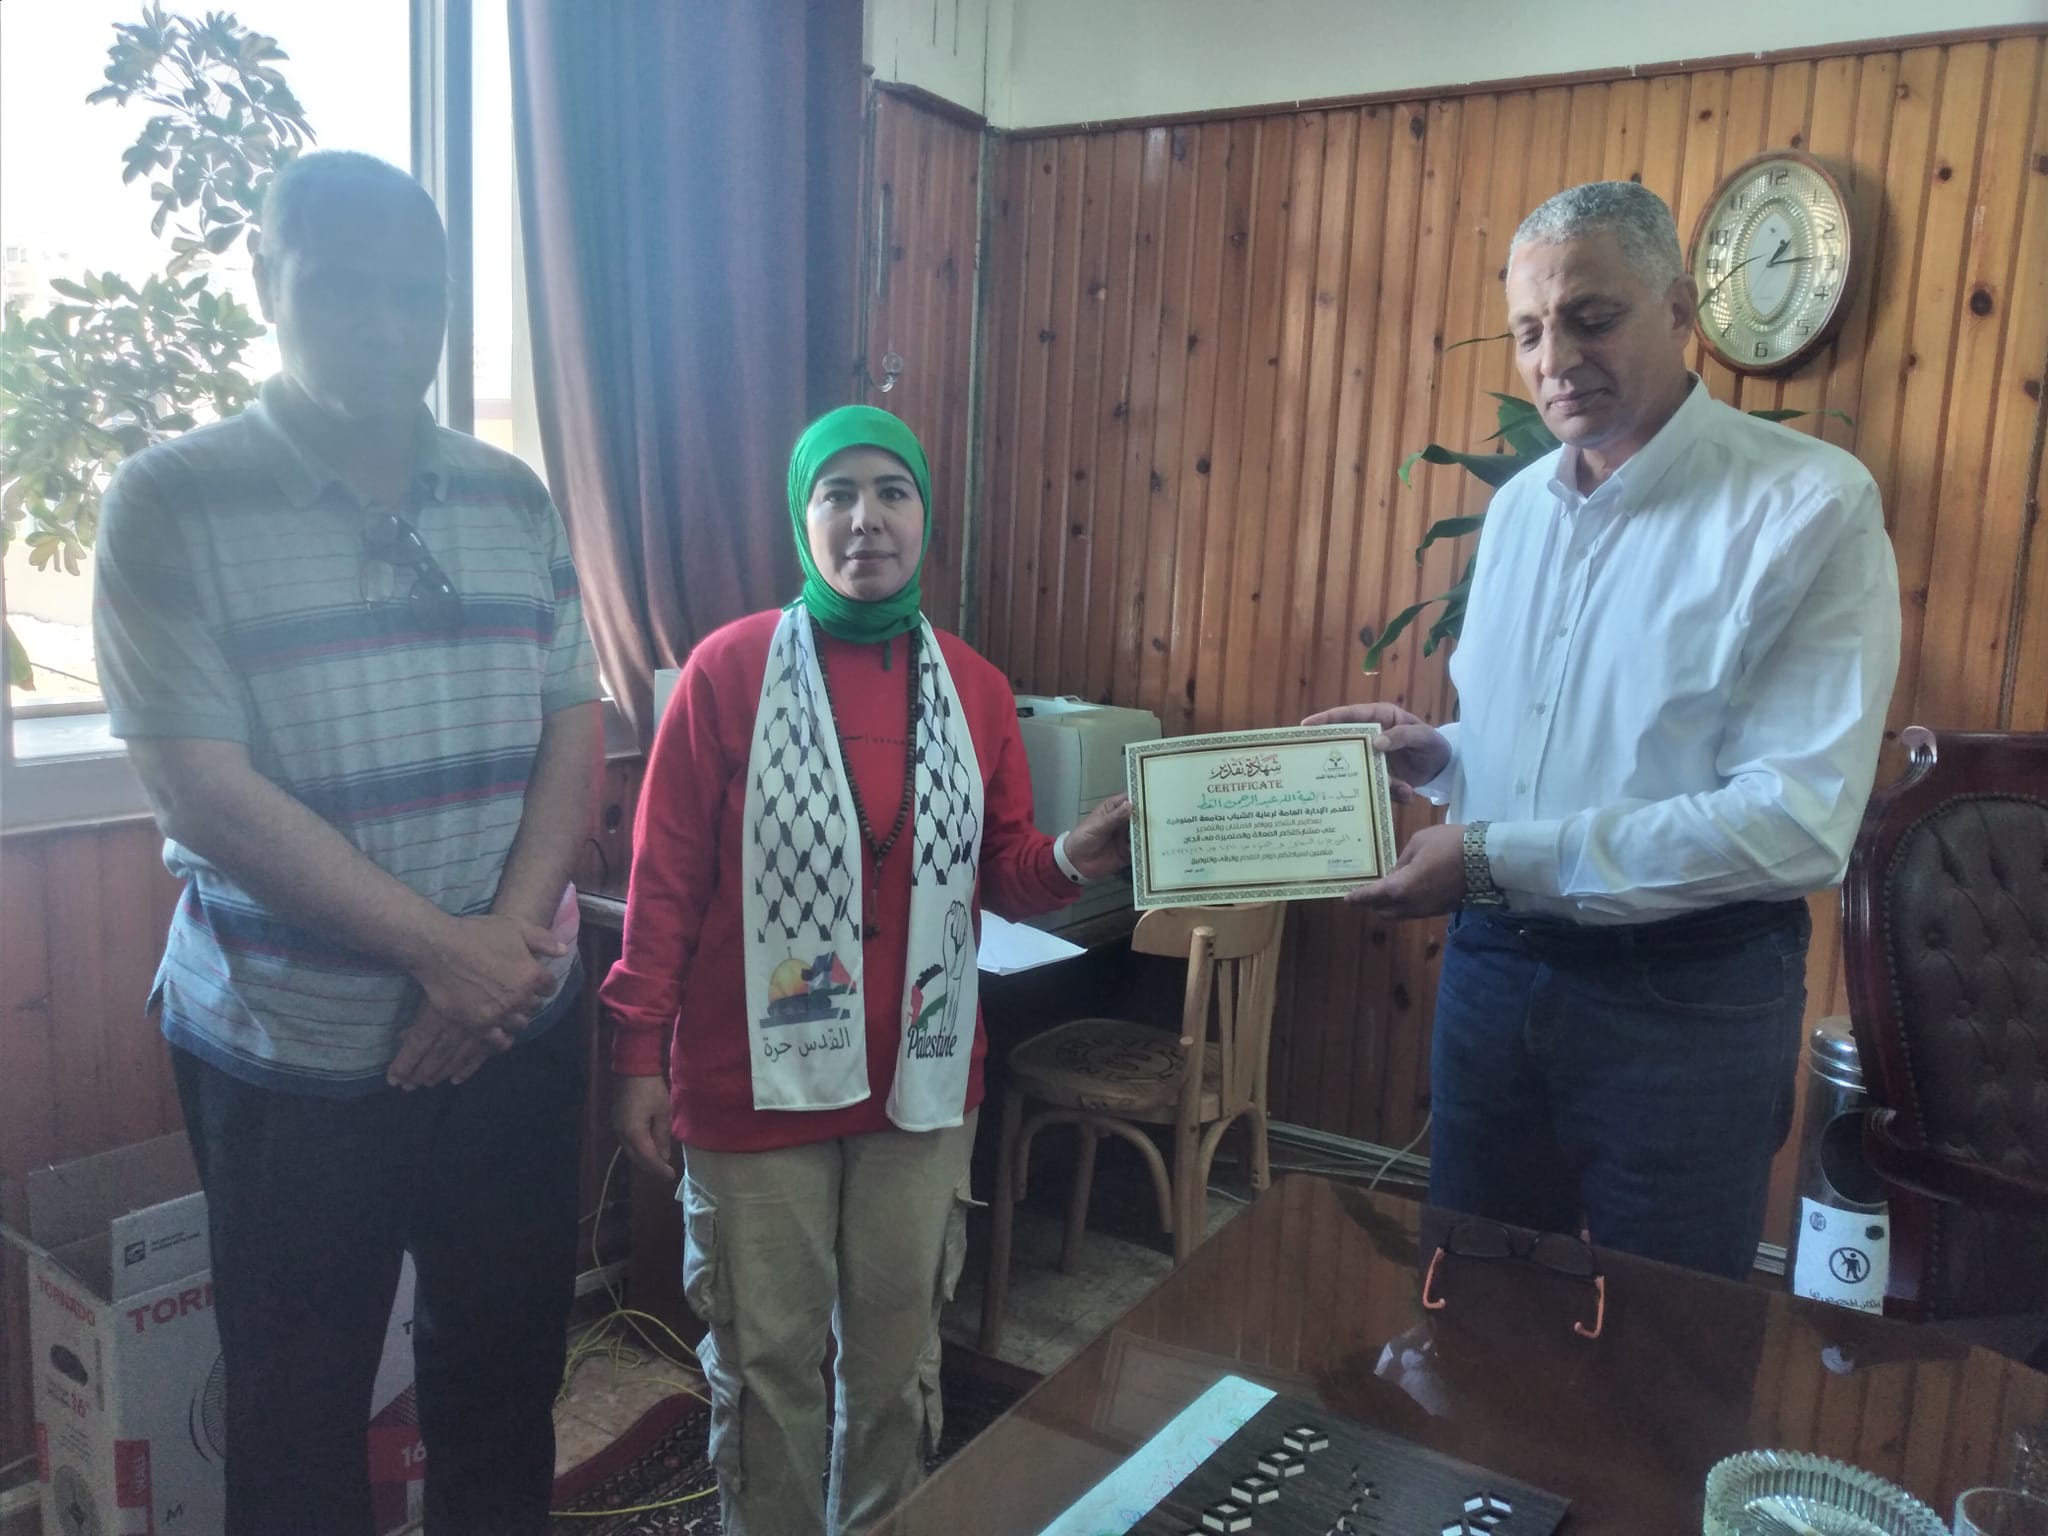 Today, Professor Dr. Essam Abdel Hafez Boodi, Dean of the College, honored the student Nisreen Ghoneim, who won first place at the university level in the Classical Poetry Cultural Festival. He also honored the student Abdel Rahman Saeed Al-Faramawy in the athletics competition for people of determination, first discus - third 100 meters. He honored Mr. Sami Badr, Director of the Youth Welfare Department, and Ms. Heba Abdel Rahman, the Cultural Activity Officer.